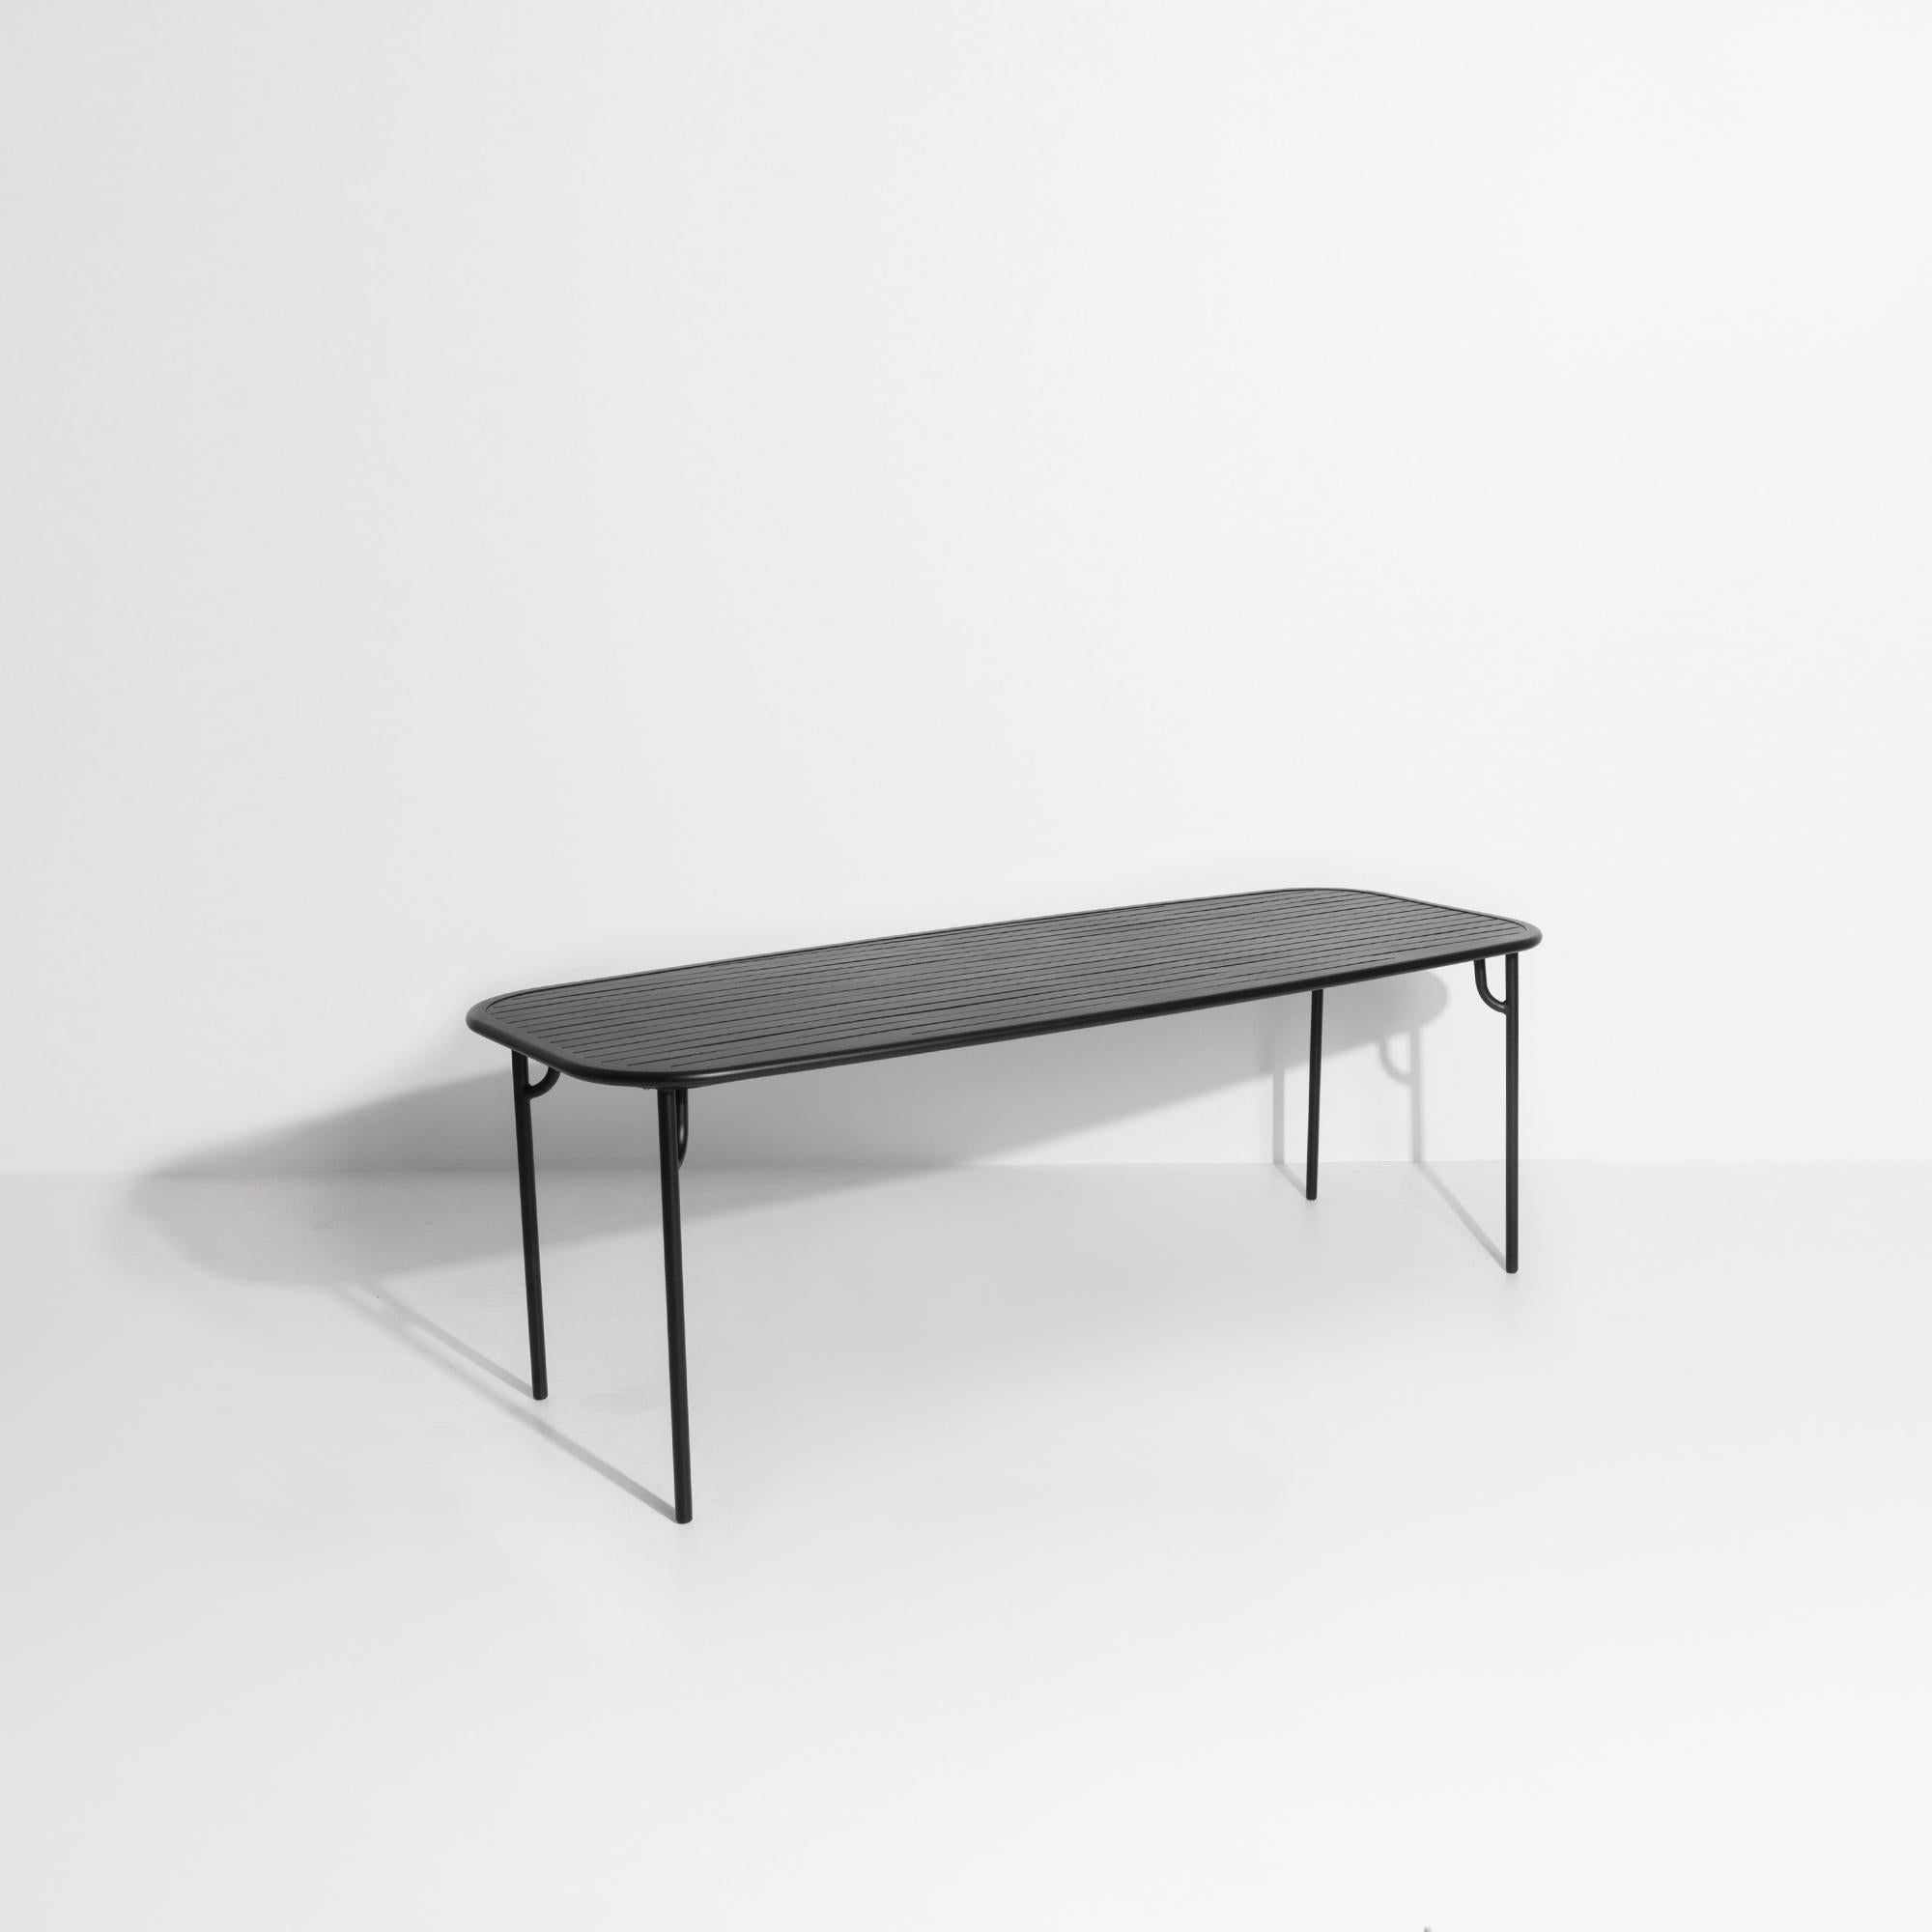 Contemporary Petite Friture Week-End Large Rectangular Dining Table in Black with Slats For Sale